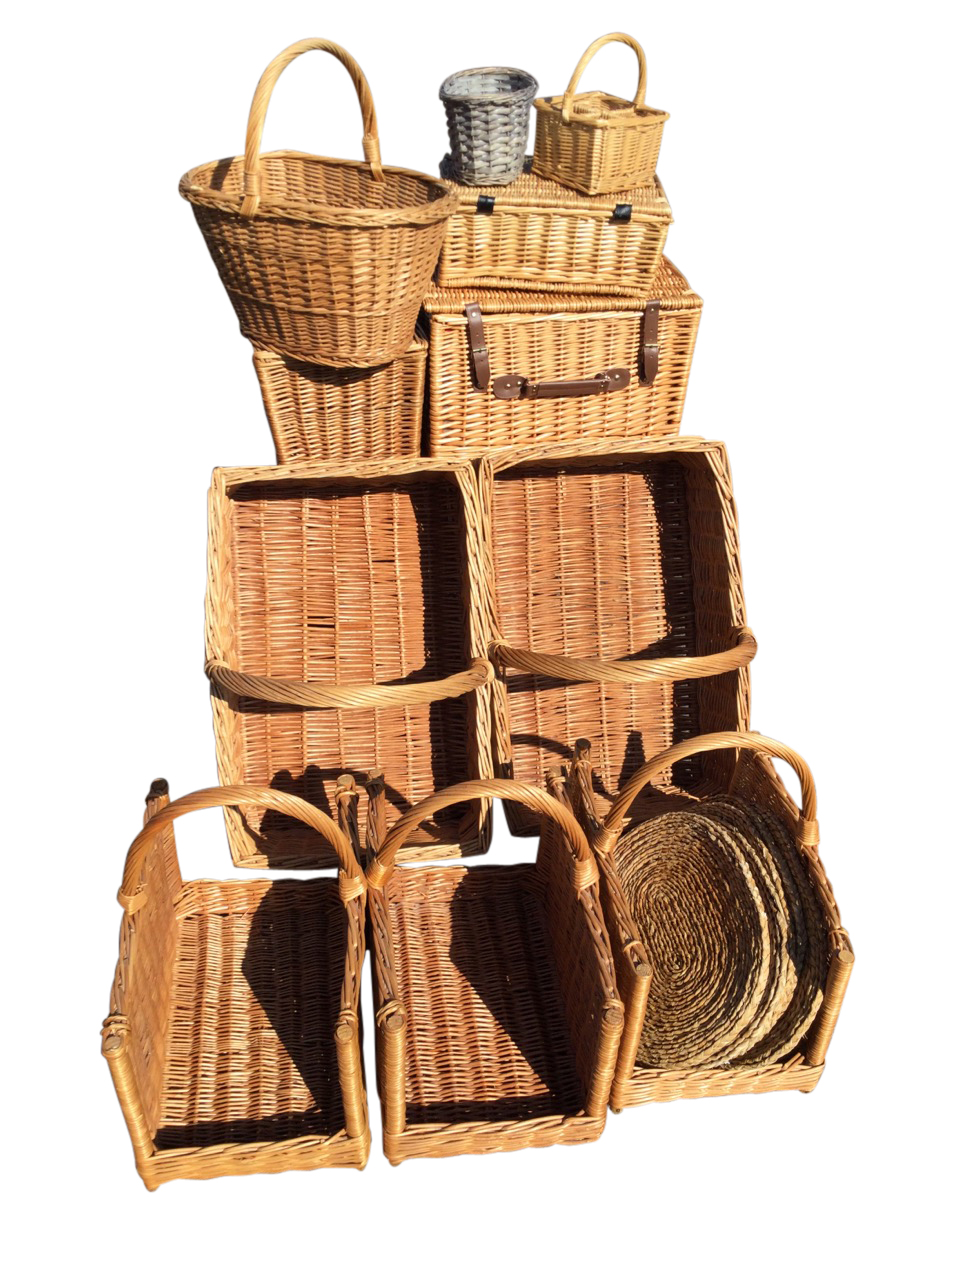 Miscellaneous wicker baskets including hamper style, pairs, rush placemats, bottle baskets, an